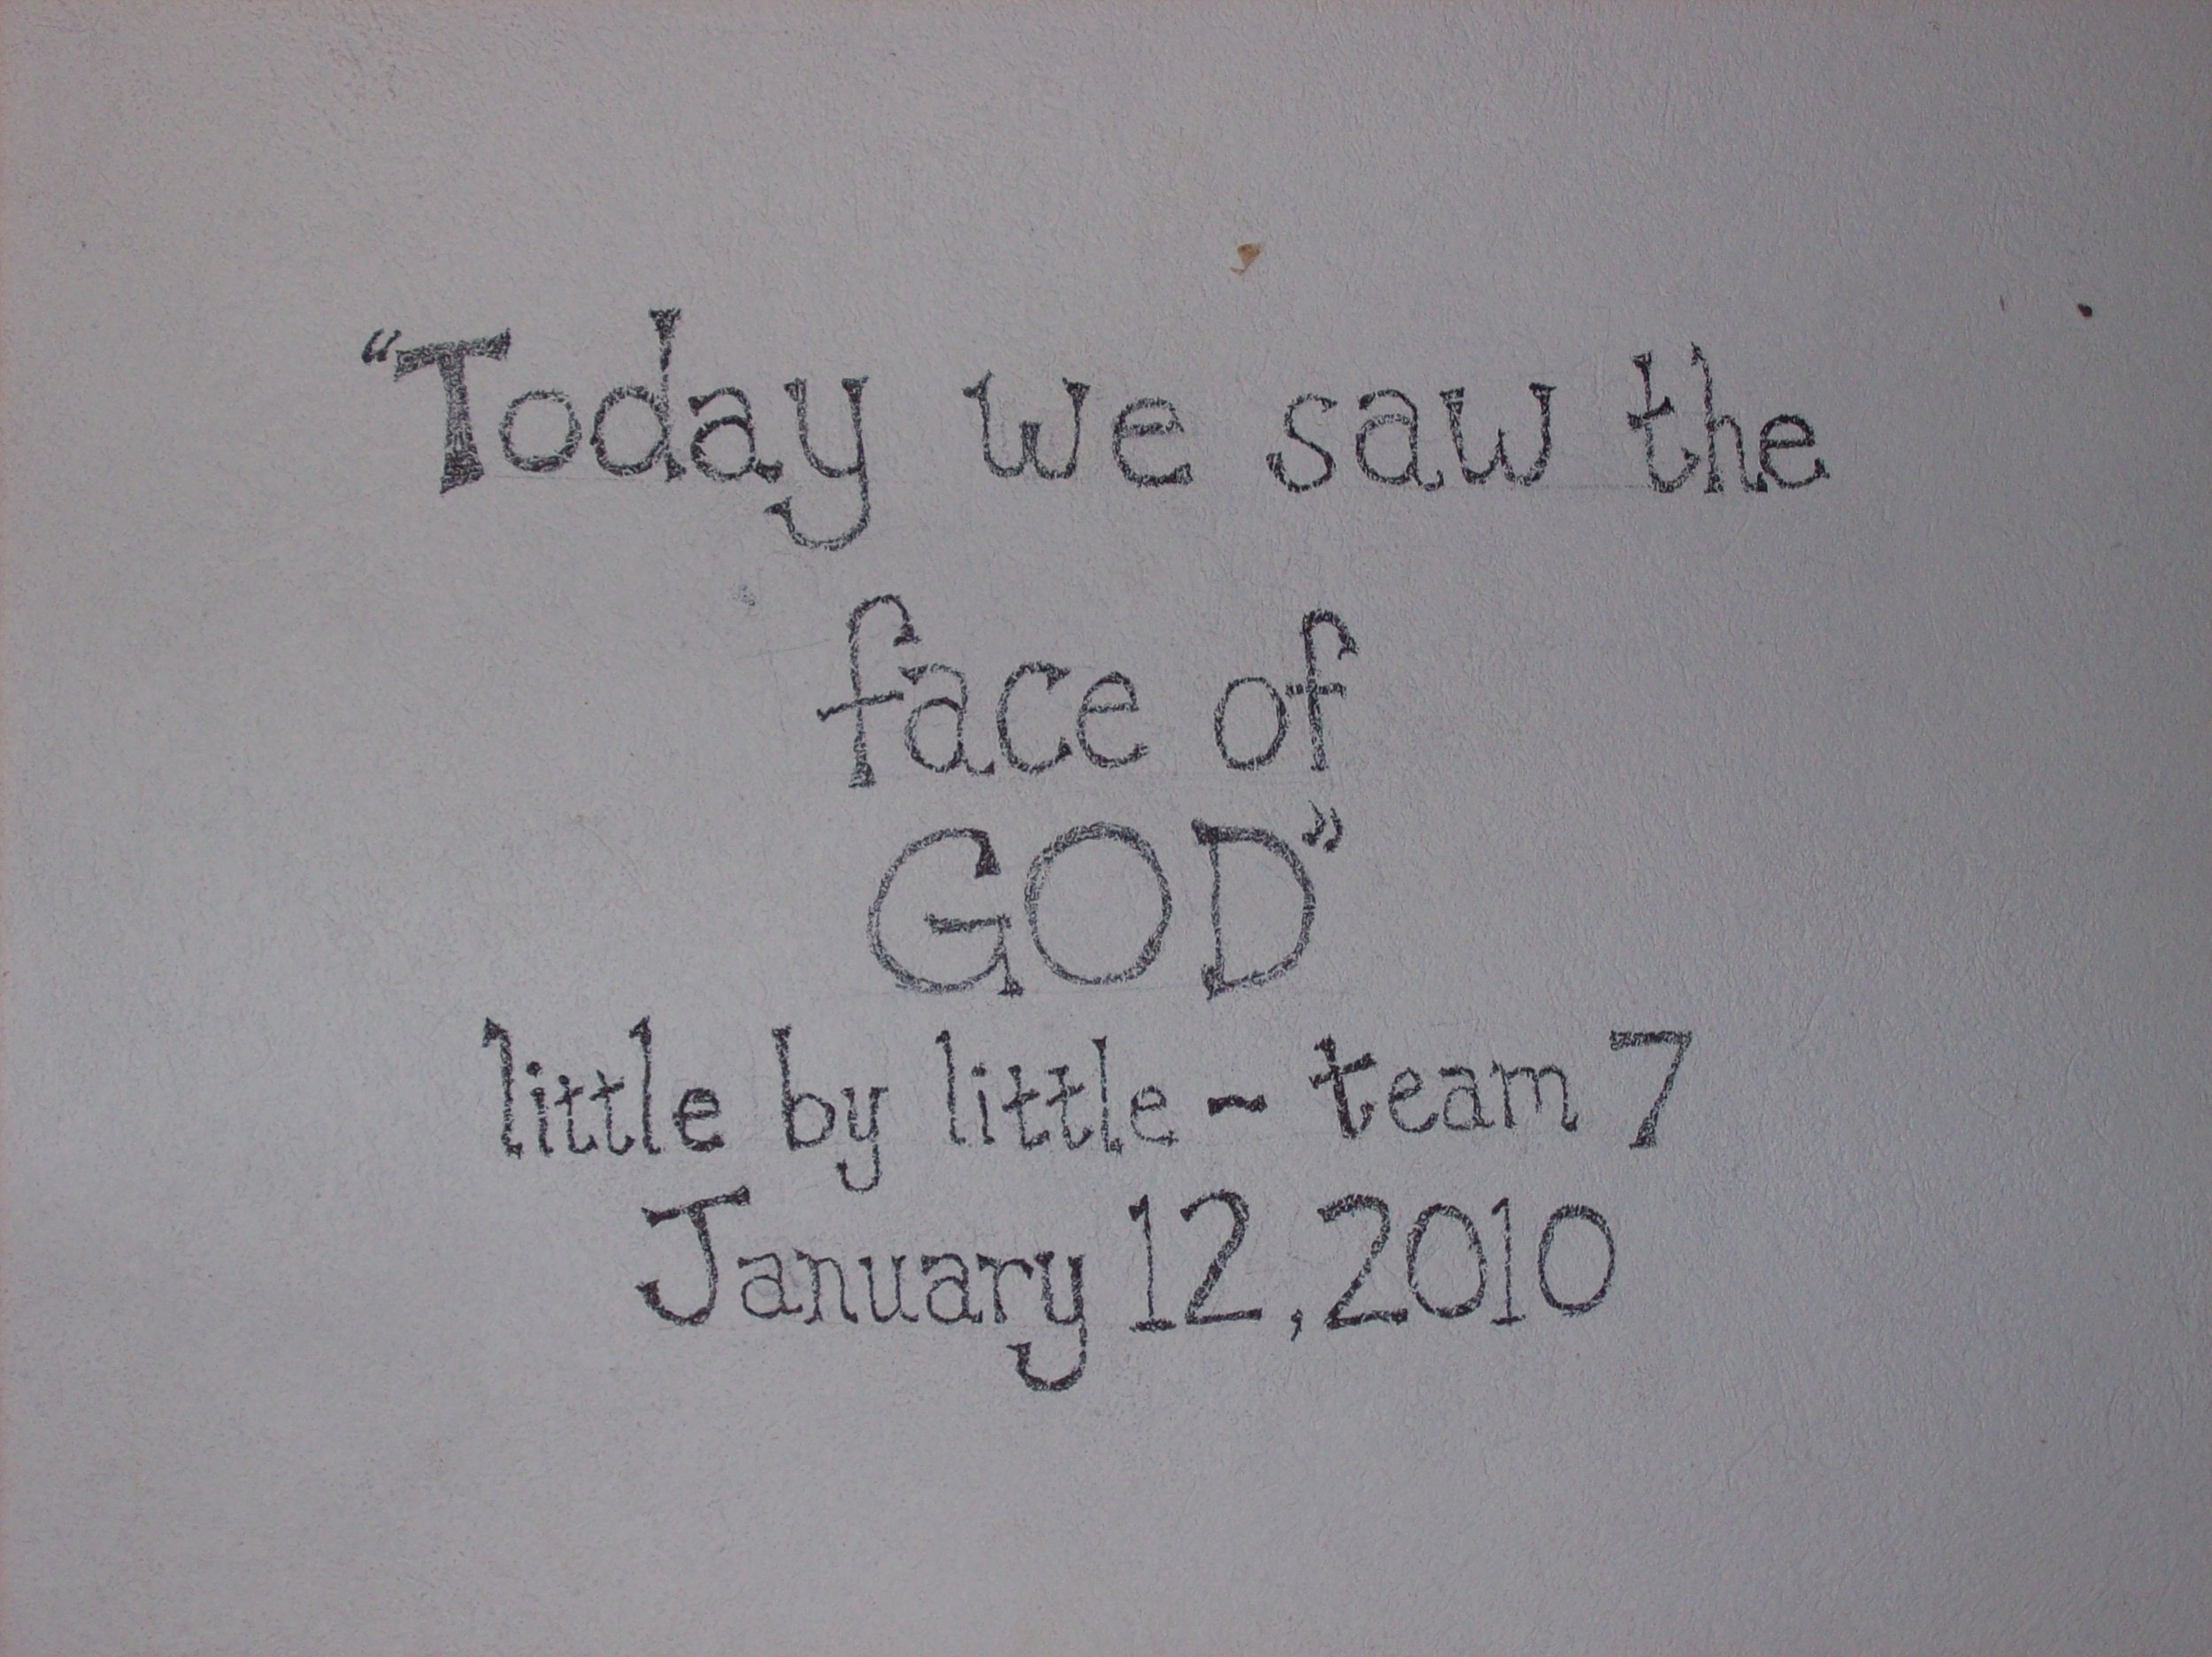 The original inscription written on the walls of the MTM clinic in Gramothe, Haiti on January 12, 2010. 